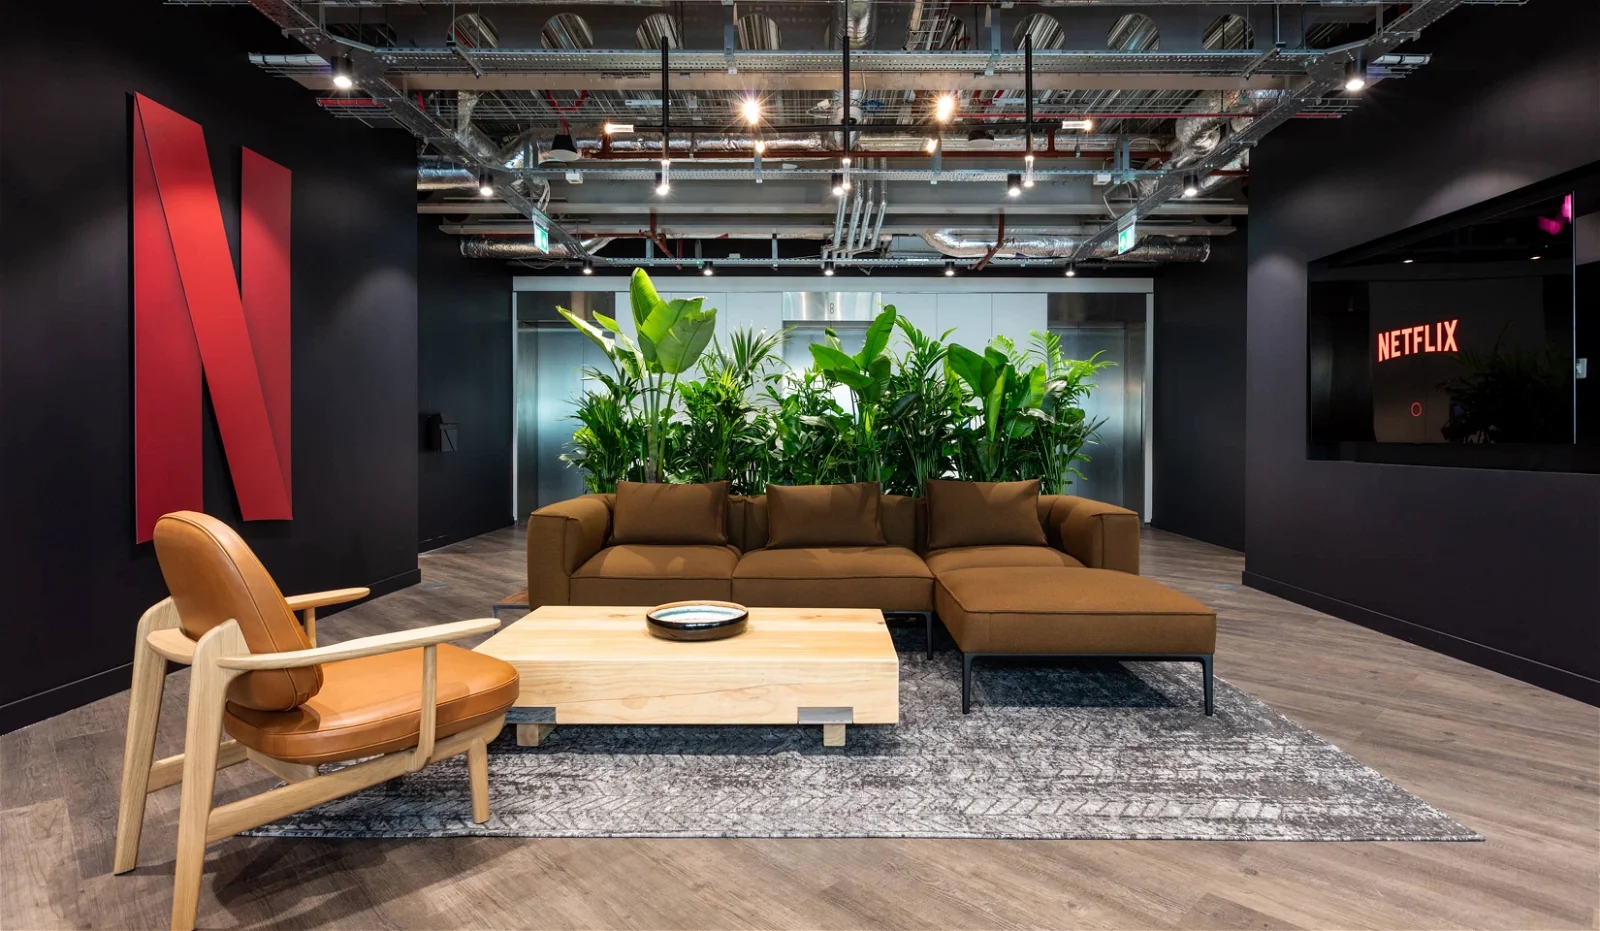 A modern office lounge with a large Netflix logo on the wall, featuring contemporary furniture and a wall of green plants under exposed ceiling infrastructure.